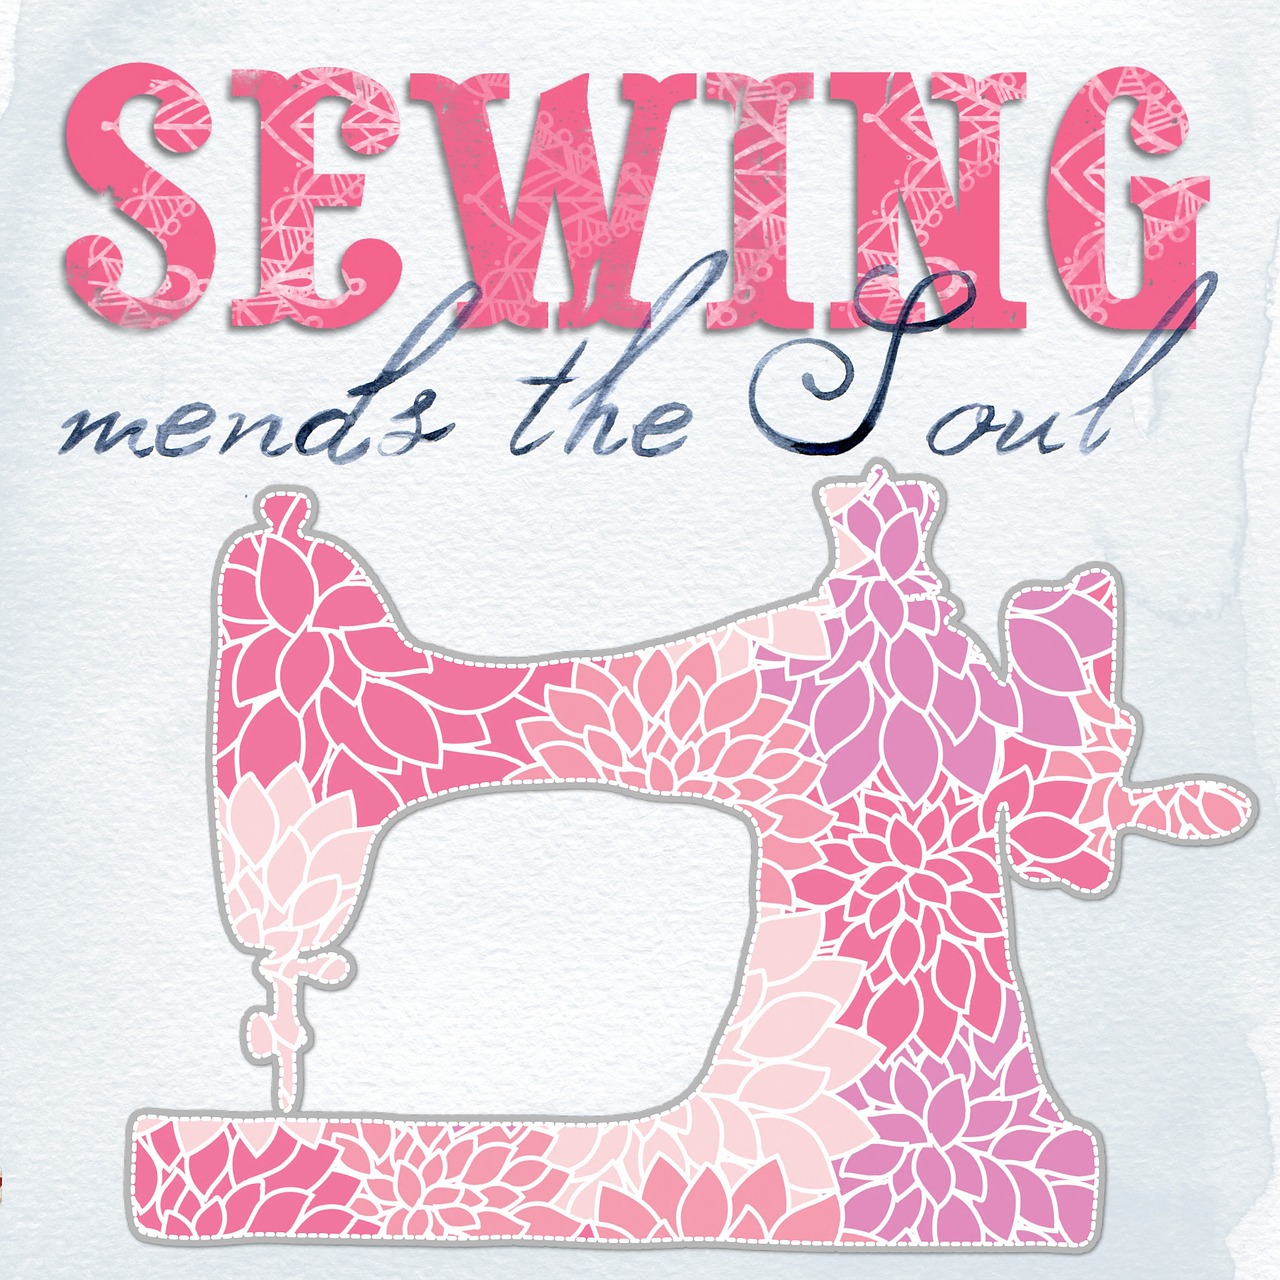 sewing collage art free photo